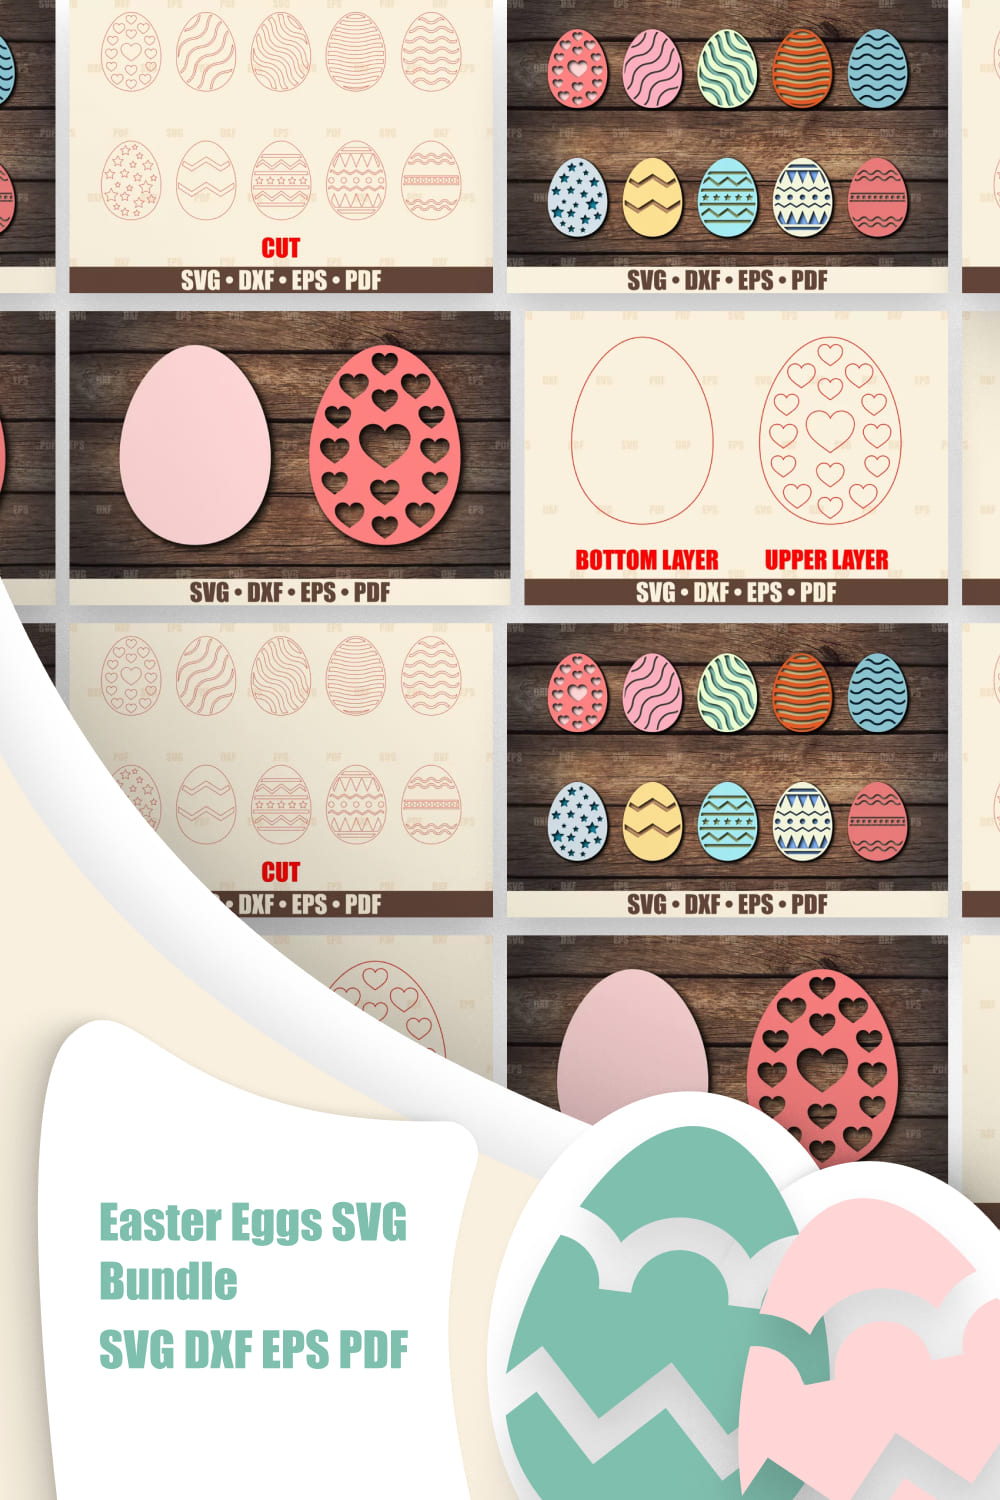 Colorful Easter eggs with different prints.